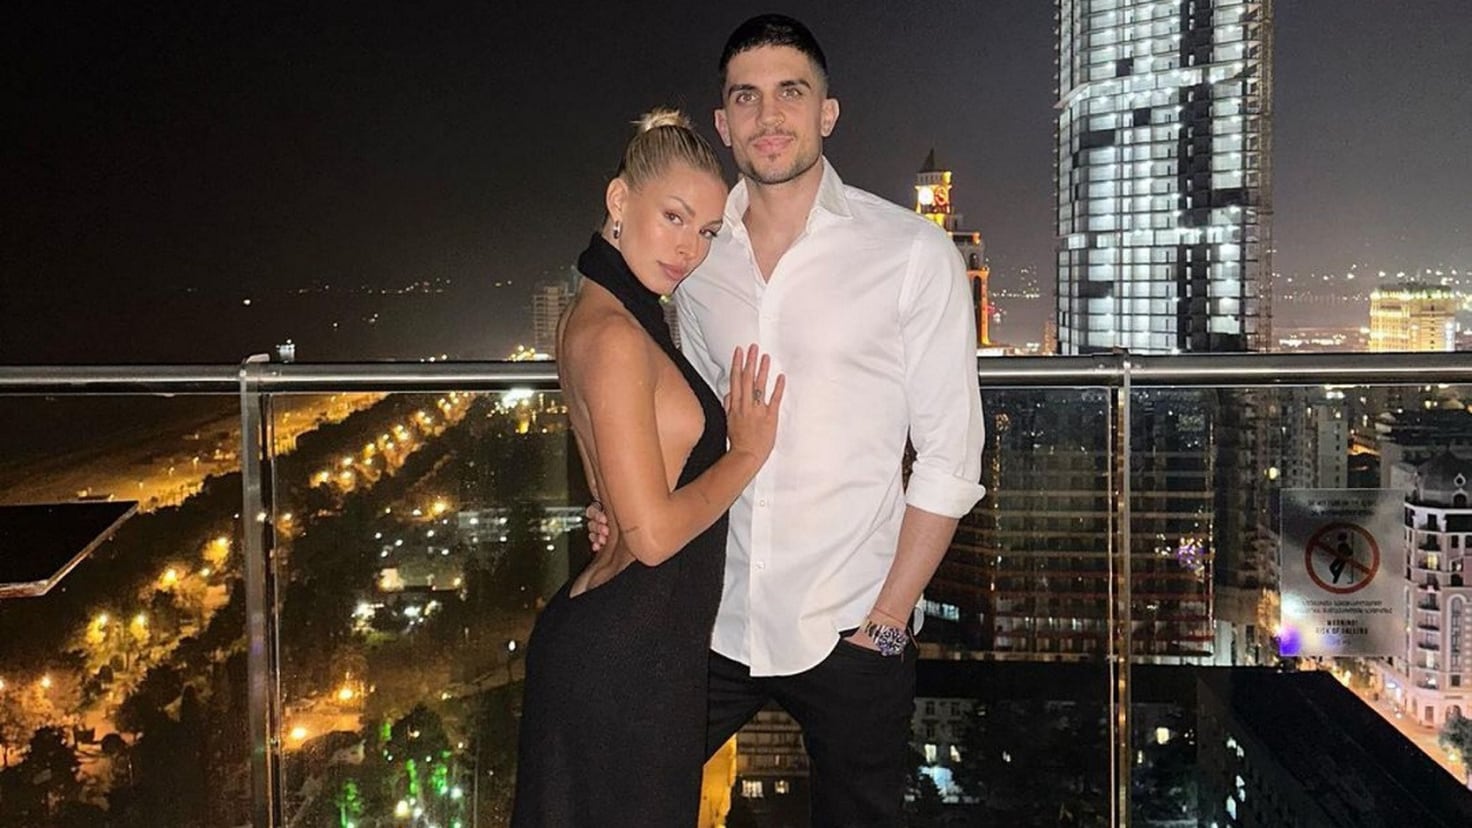 Jessica Goicoechea makes a mistake by revealing when she started with Bartra
